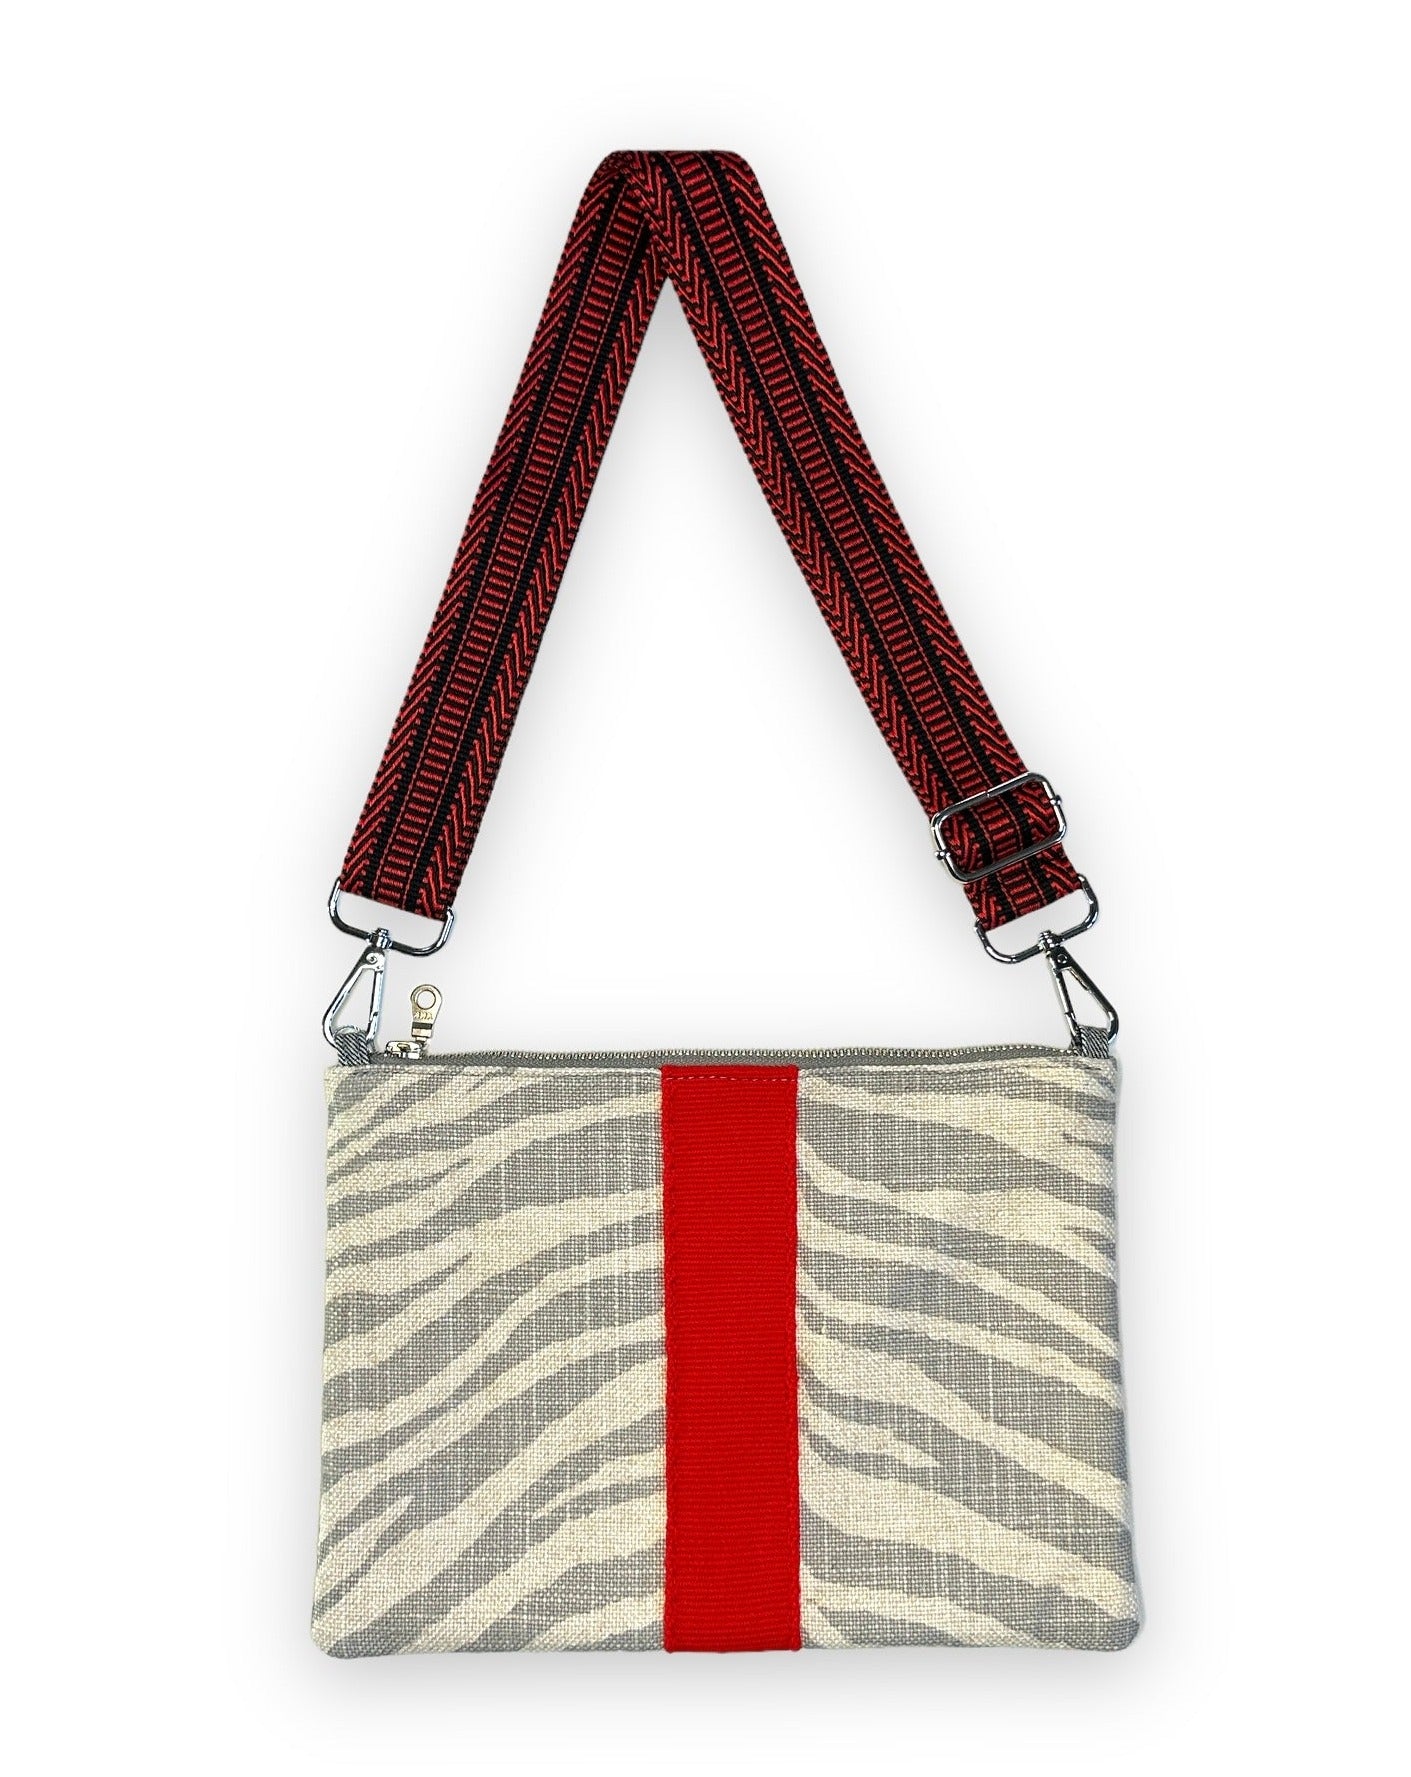 Grey and Cream zebra print with red and black guitar strap webbing.